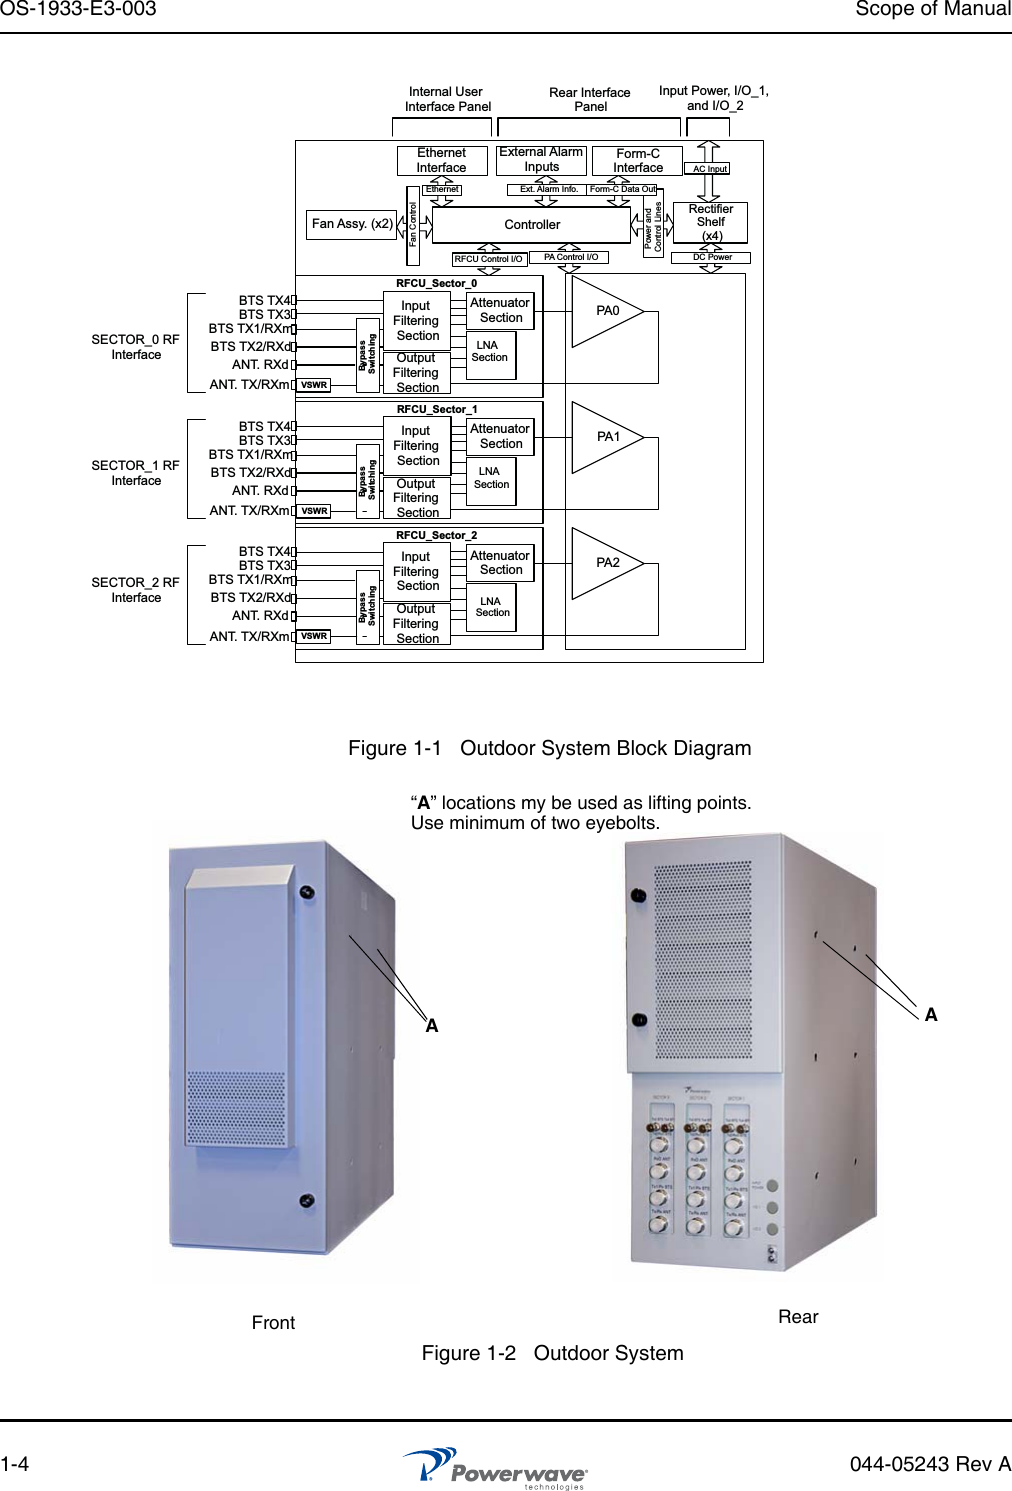 OS-1933-E3-003 Scope of Manual1-4 044-05243 Rev AFigure 1-1   Outdoor System Block DiagramPA0Attenuator SectionControllerEthernet Interface BTS TX1/RXmBTS TX2/RXdANT. RXdANT. TX/RXmRectifier Shelf (x4)PA Control I/ORFCU Control I/OPower and Control LinesDC PowerExternal Alarm InputsExt. Alarm Info.Form-CInterfaceForm-C Data OutVSWRRFCU_Sector_0PA1Input Filtering SectionOutput Filtering SectionAttenuator SectionRFCU_Sector_1PA2Attenuator SectionRFCU_Sector_2SECTOR_0 RF InterfaceSECTOR_1 RF InterfaceSECTOR_2 RF InterfaceBTS TX3BTS TX4BTS TX1/RXmBTS TX2/RXdANT. RXdANT. TX/RXm VSWRBTS TX3BTS TX4BTS TX1/RXmBTS TX2/RXdANT. RXdANT. TX/RXm VSWRBTS TX3BTS TX4Input Filtering SectionOutput Filtering SectionInput Filtering SectionOutput Filtering SectionBypass SwitchingBypass SwitchingBypass SwitchingLNA SectionLNA SectionLNA SectionInput Power, I/O_1, and I/O_2Fan Assy. (x2)Fan ControlInternal User Interface PanelRear Interface PanelEthernetAC InputFigure 1-2   Outdoor System Front RearAA“A” locations my be used as lifting points.Use minimum of two eyebolts.